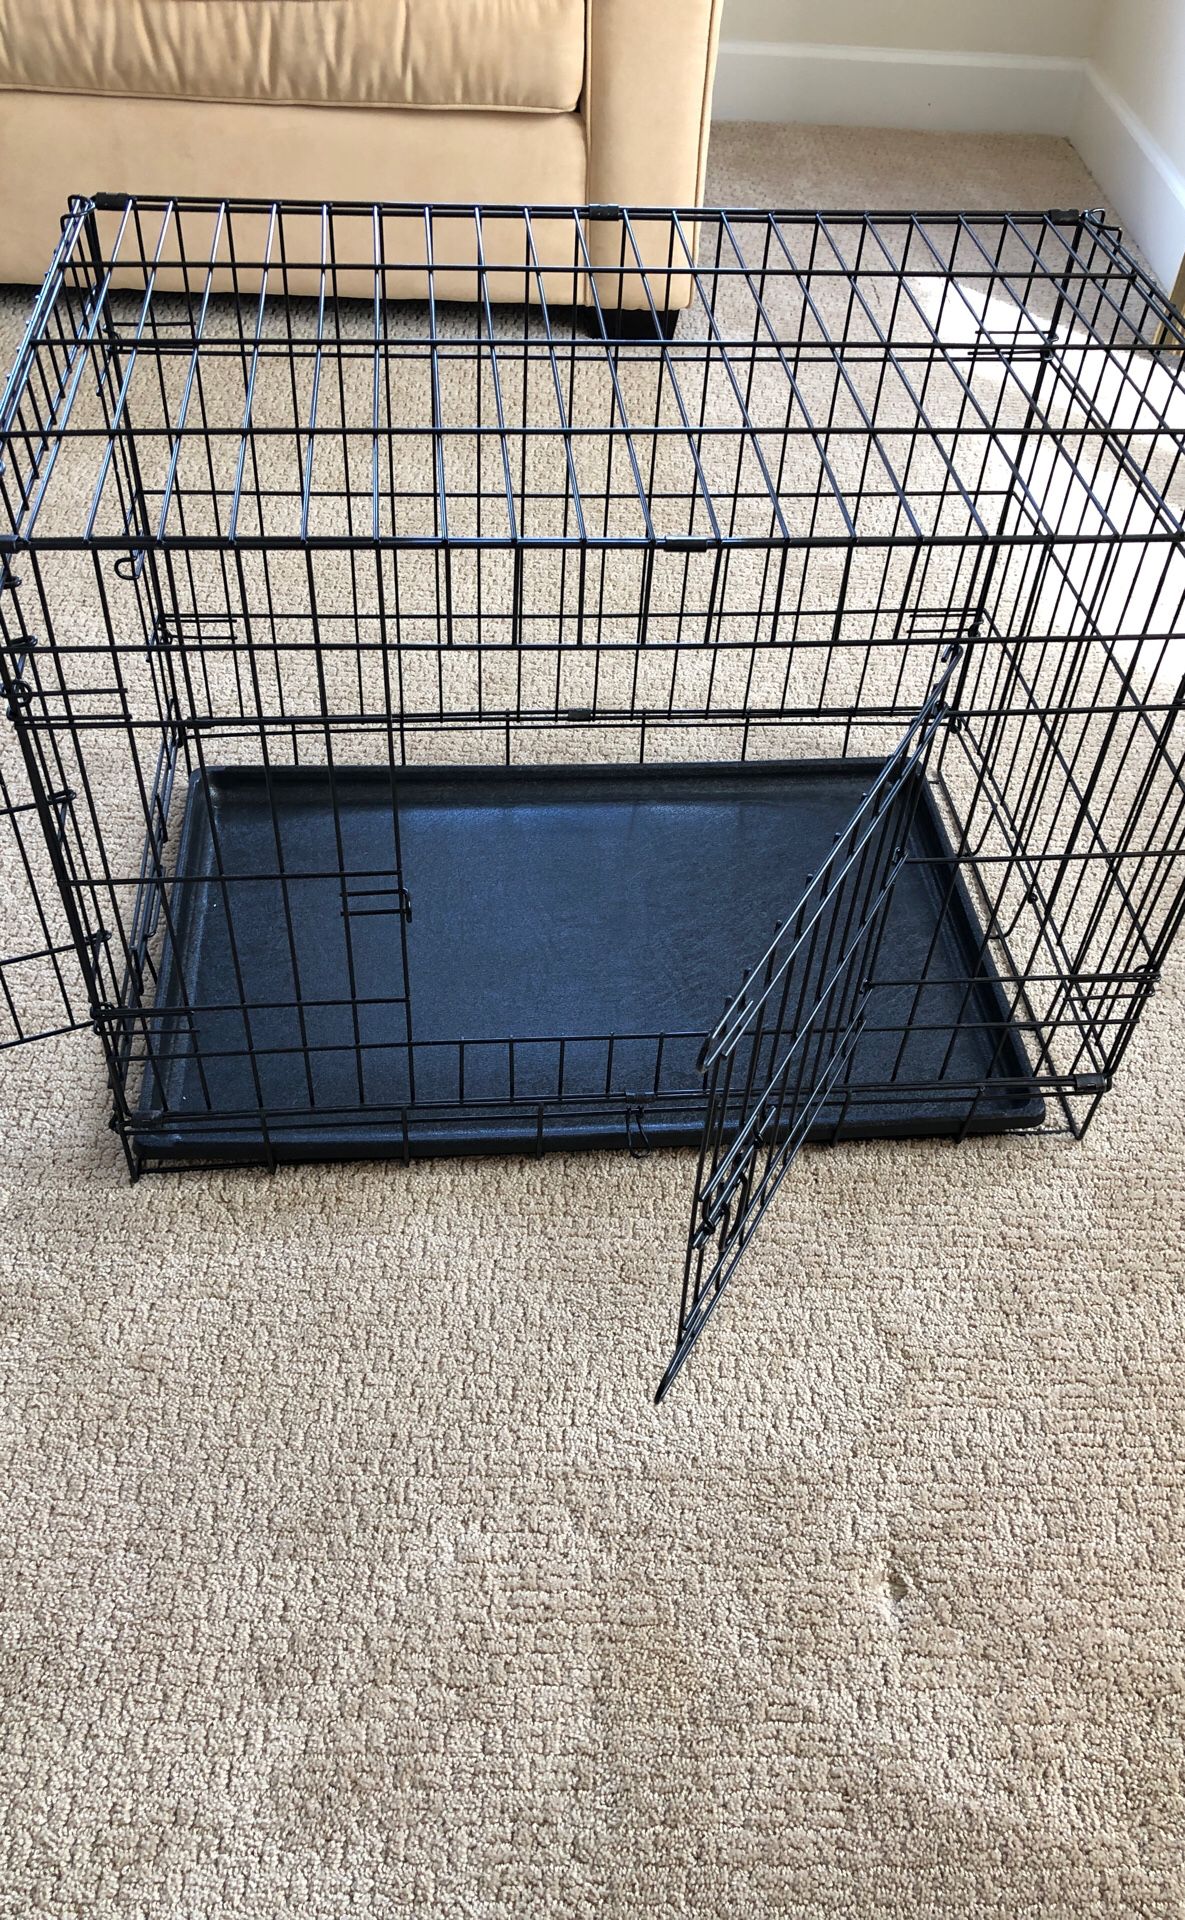 Dog crate,kennel, cage (medium/large)